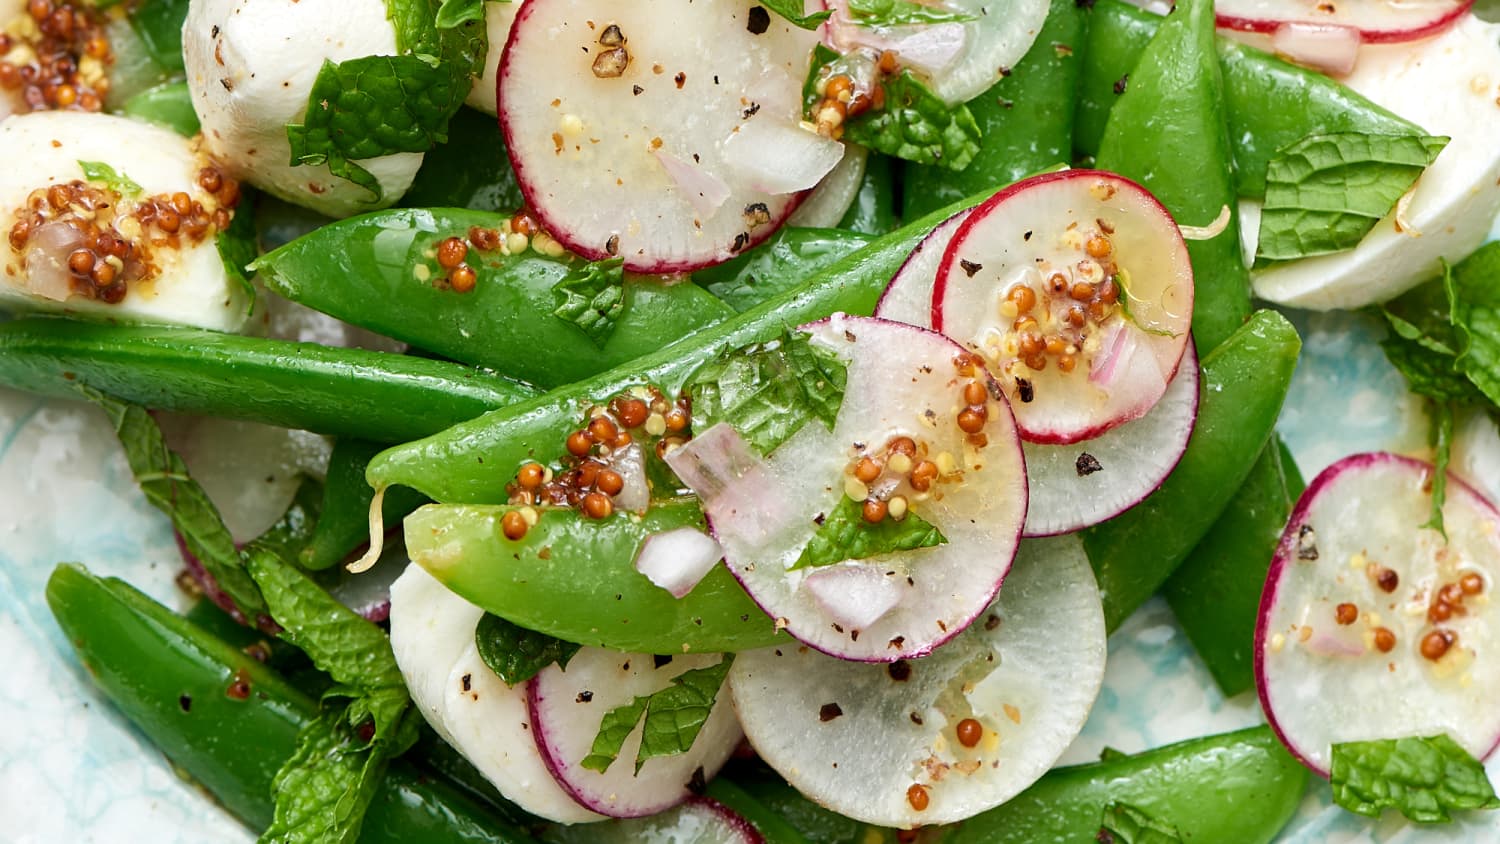 Snap Pea Salad with Mint, Feta and Radishes – Produce Pack